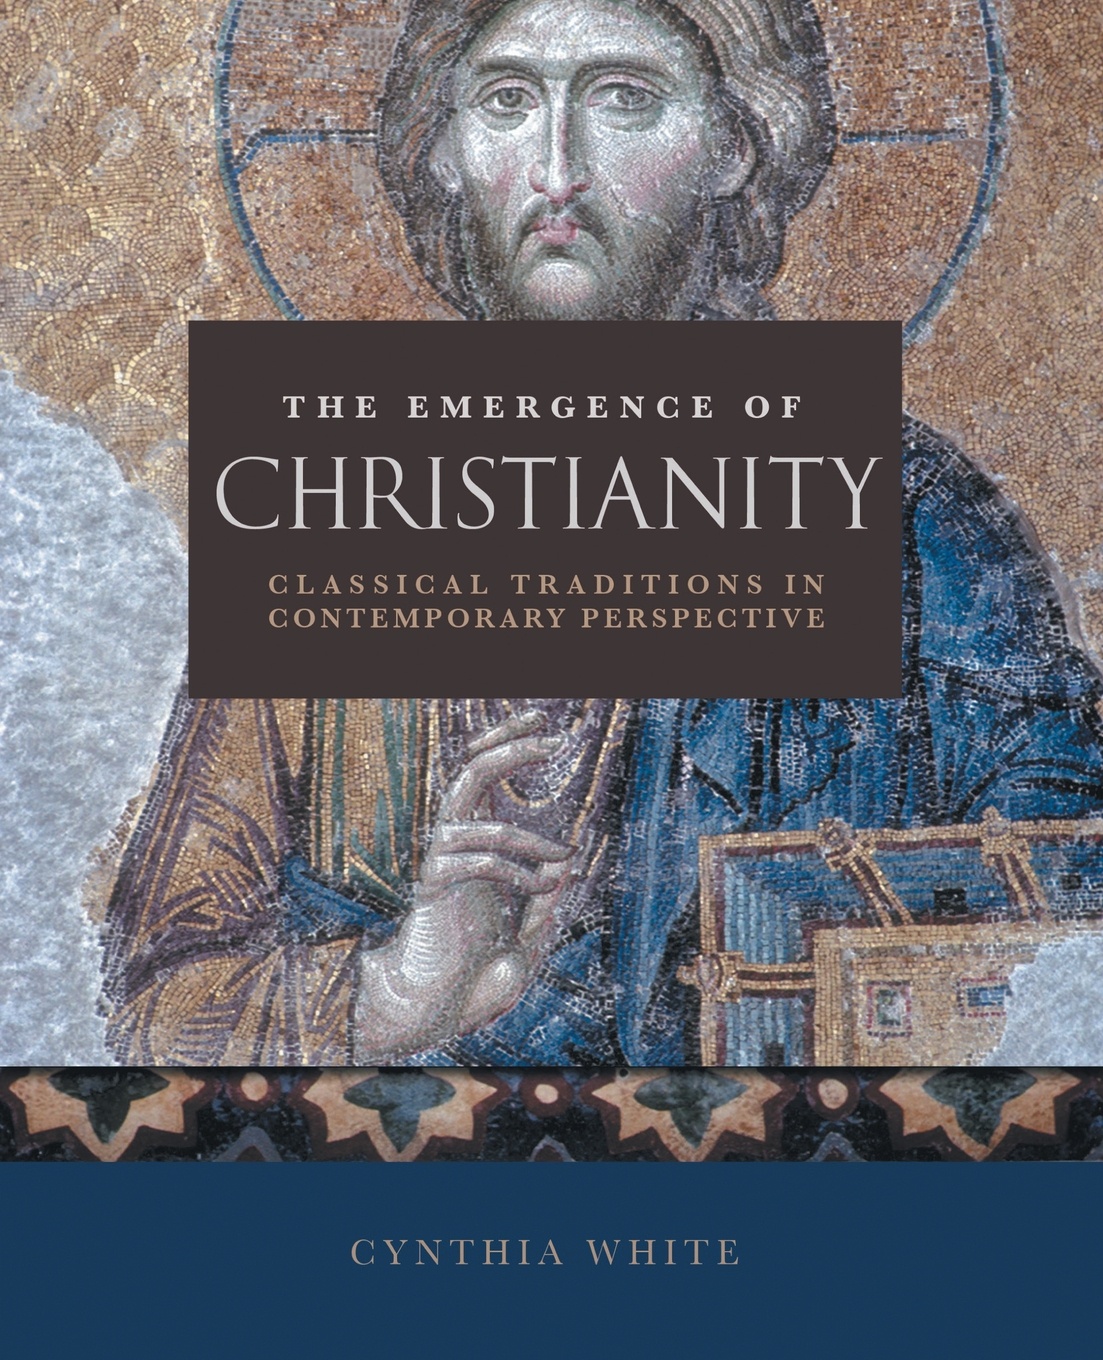 The Emergence of Christianity. Classical Traditions in Contemporary Perspective